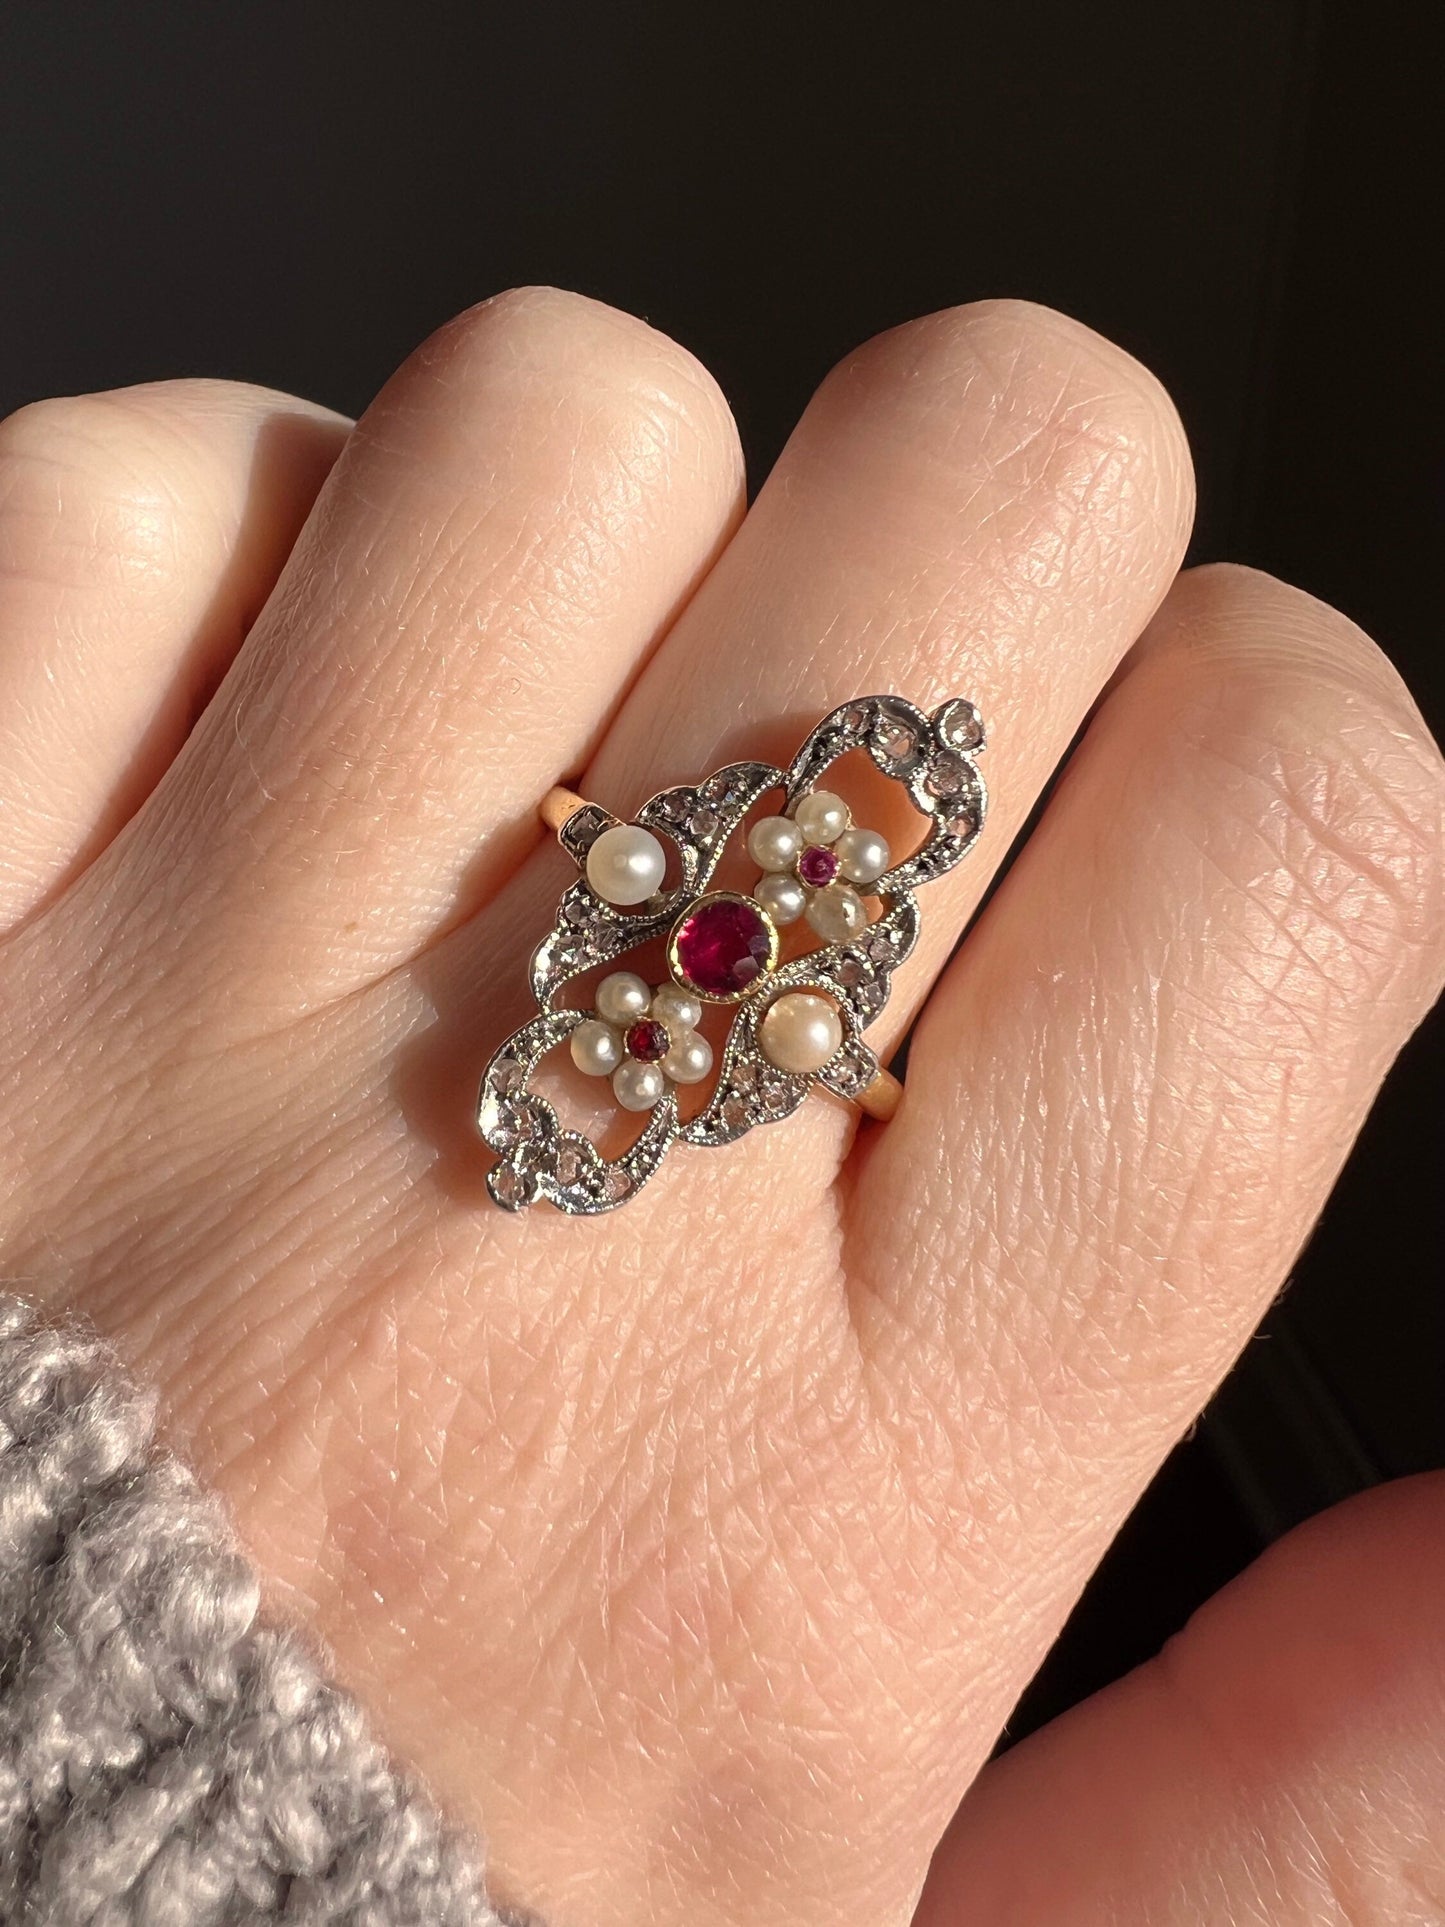 Belle Epoque FRENCH Antique FLORAL Navette Ring RUBY Pearl Flowers Rose Cut DiAMONDS 18k Gold Art Nouveau Victorian Romantic Gift Stacker